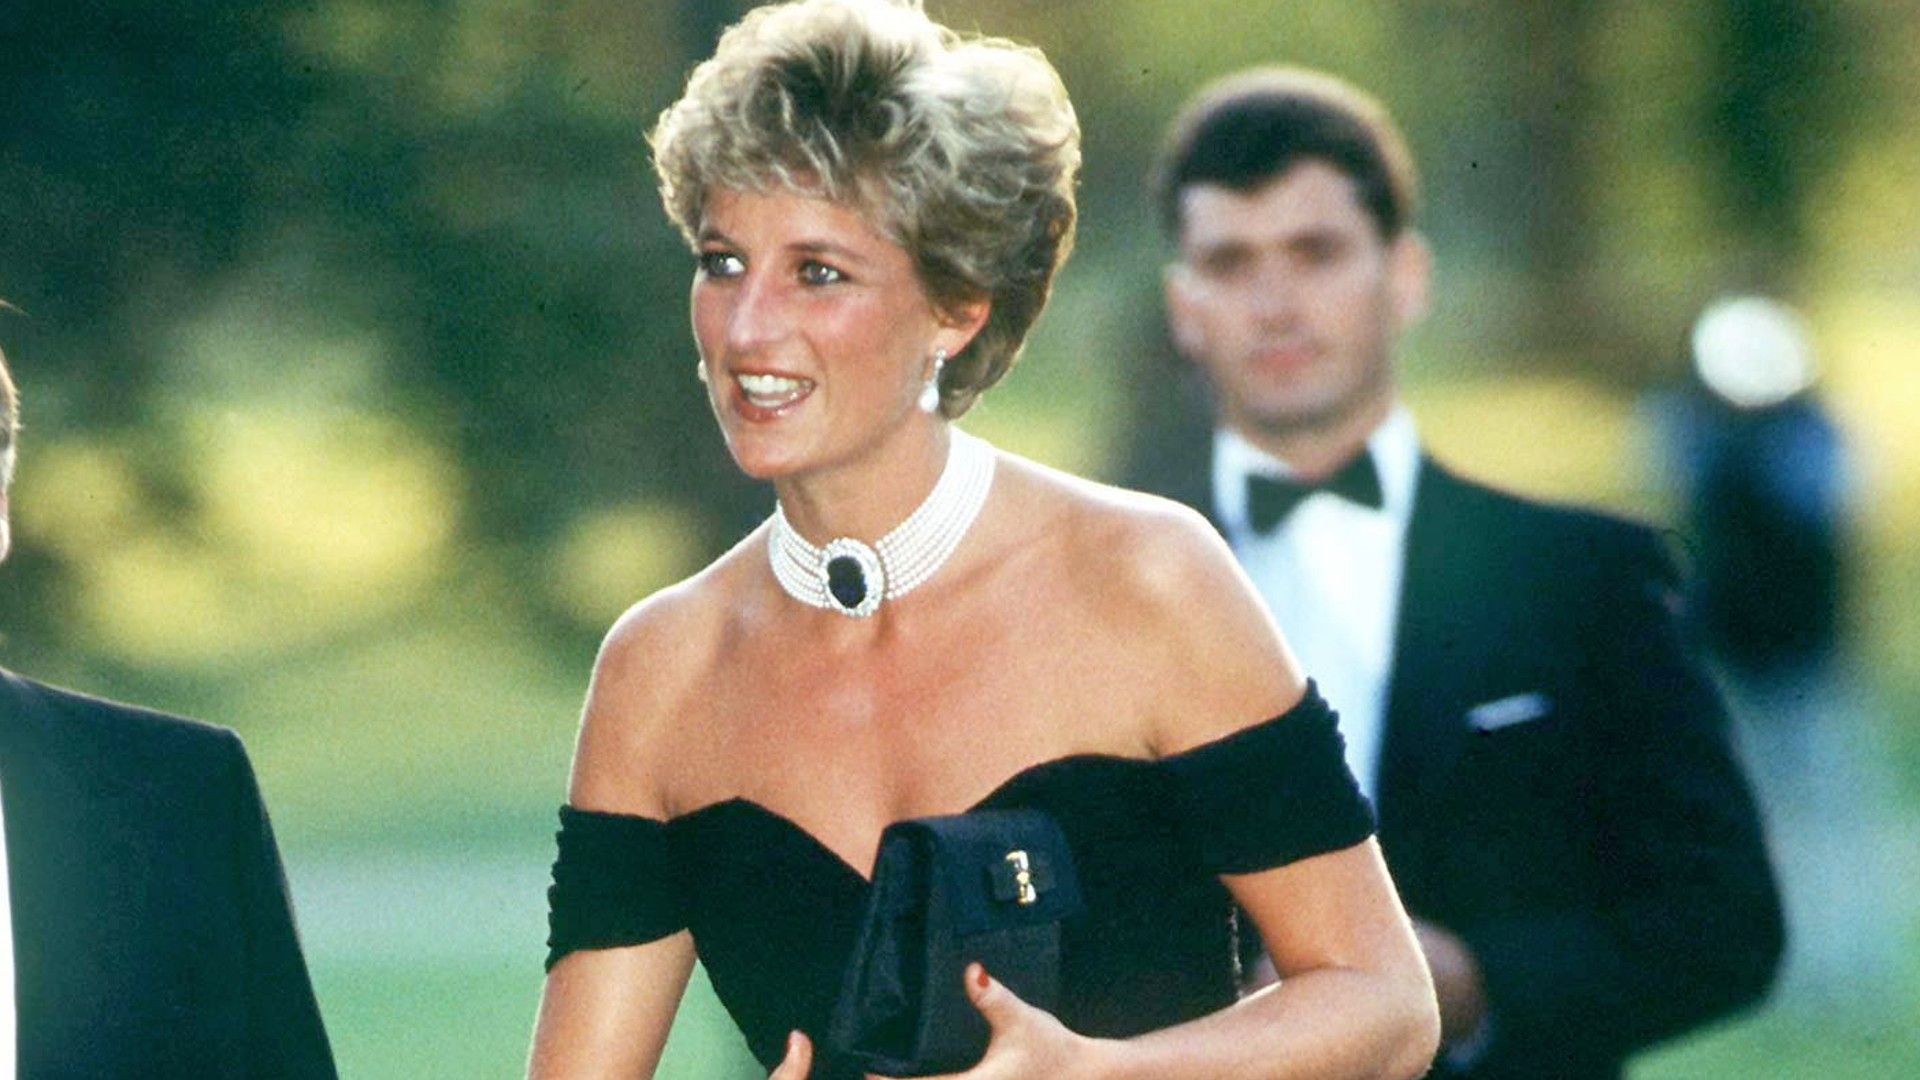 <p>                     Princess Diana and Charles’ divorce was finalised in August 1996, just a year before she passed away. Despite the sadness over the end of their marriage, Diana received a healthy settlement after her separation from the (then) future King.                   </p>                                      <p>                     According to reports, she was awarded a lump sum of around £17 million – which in today’s terms is equivalent to about £35 million – as well as £400,000 per year to run and maintain her private office and life. During the divorce, both parties also signed an agreement stating that they wouldn’t share any further private details of their marriage or their divorce.                   </p>